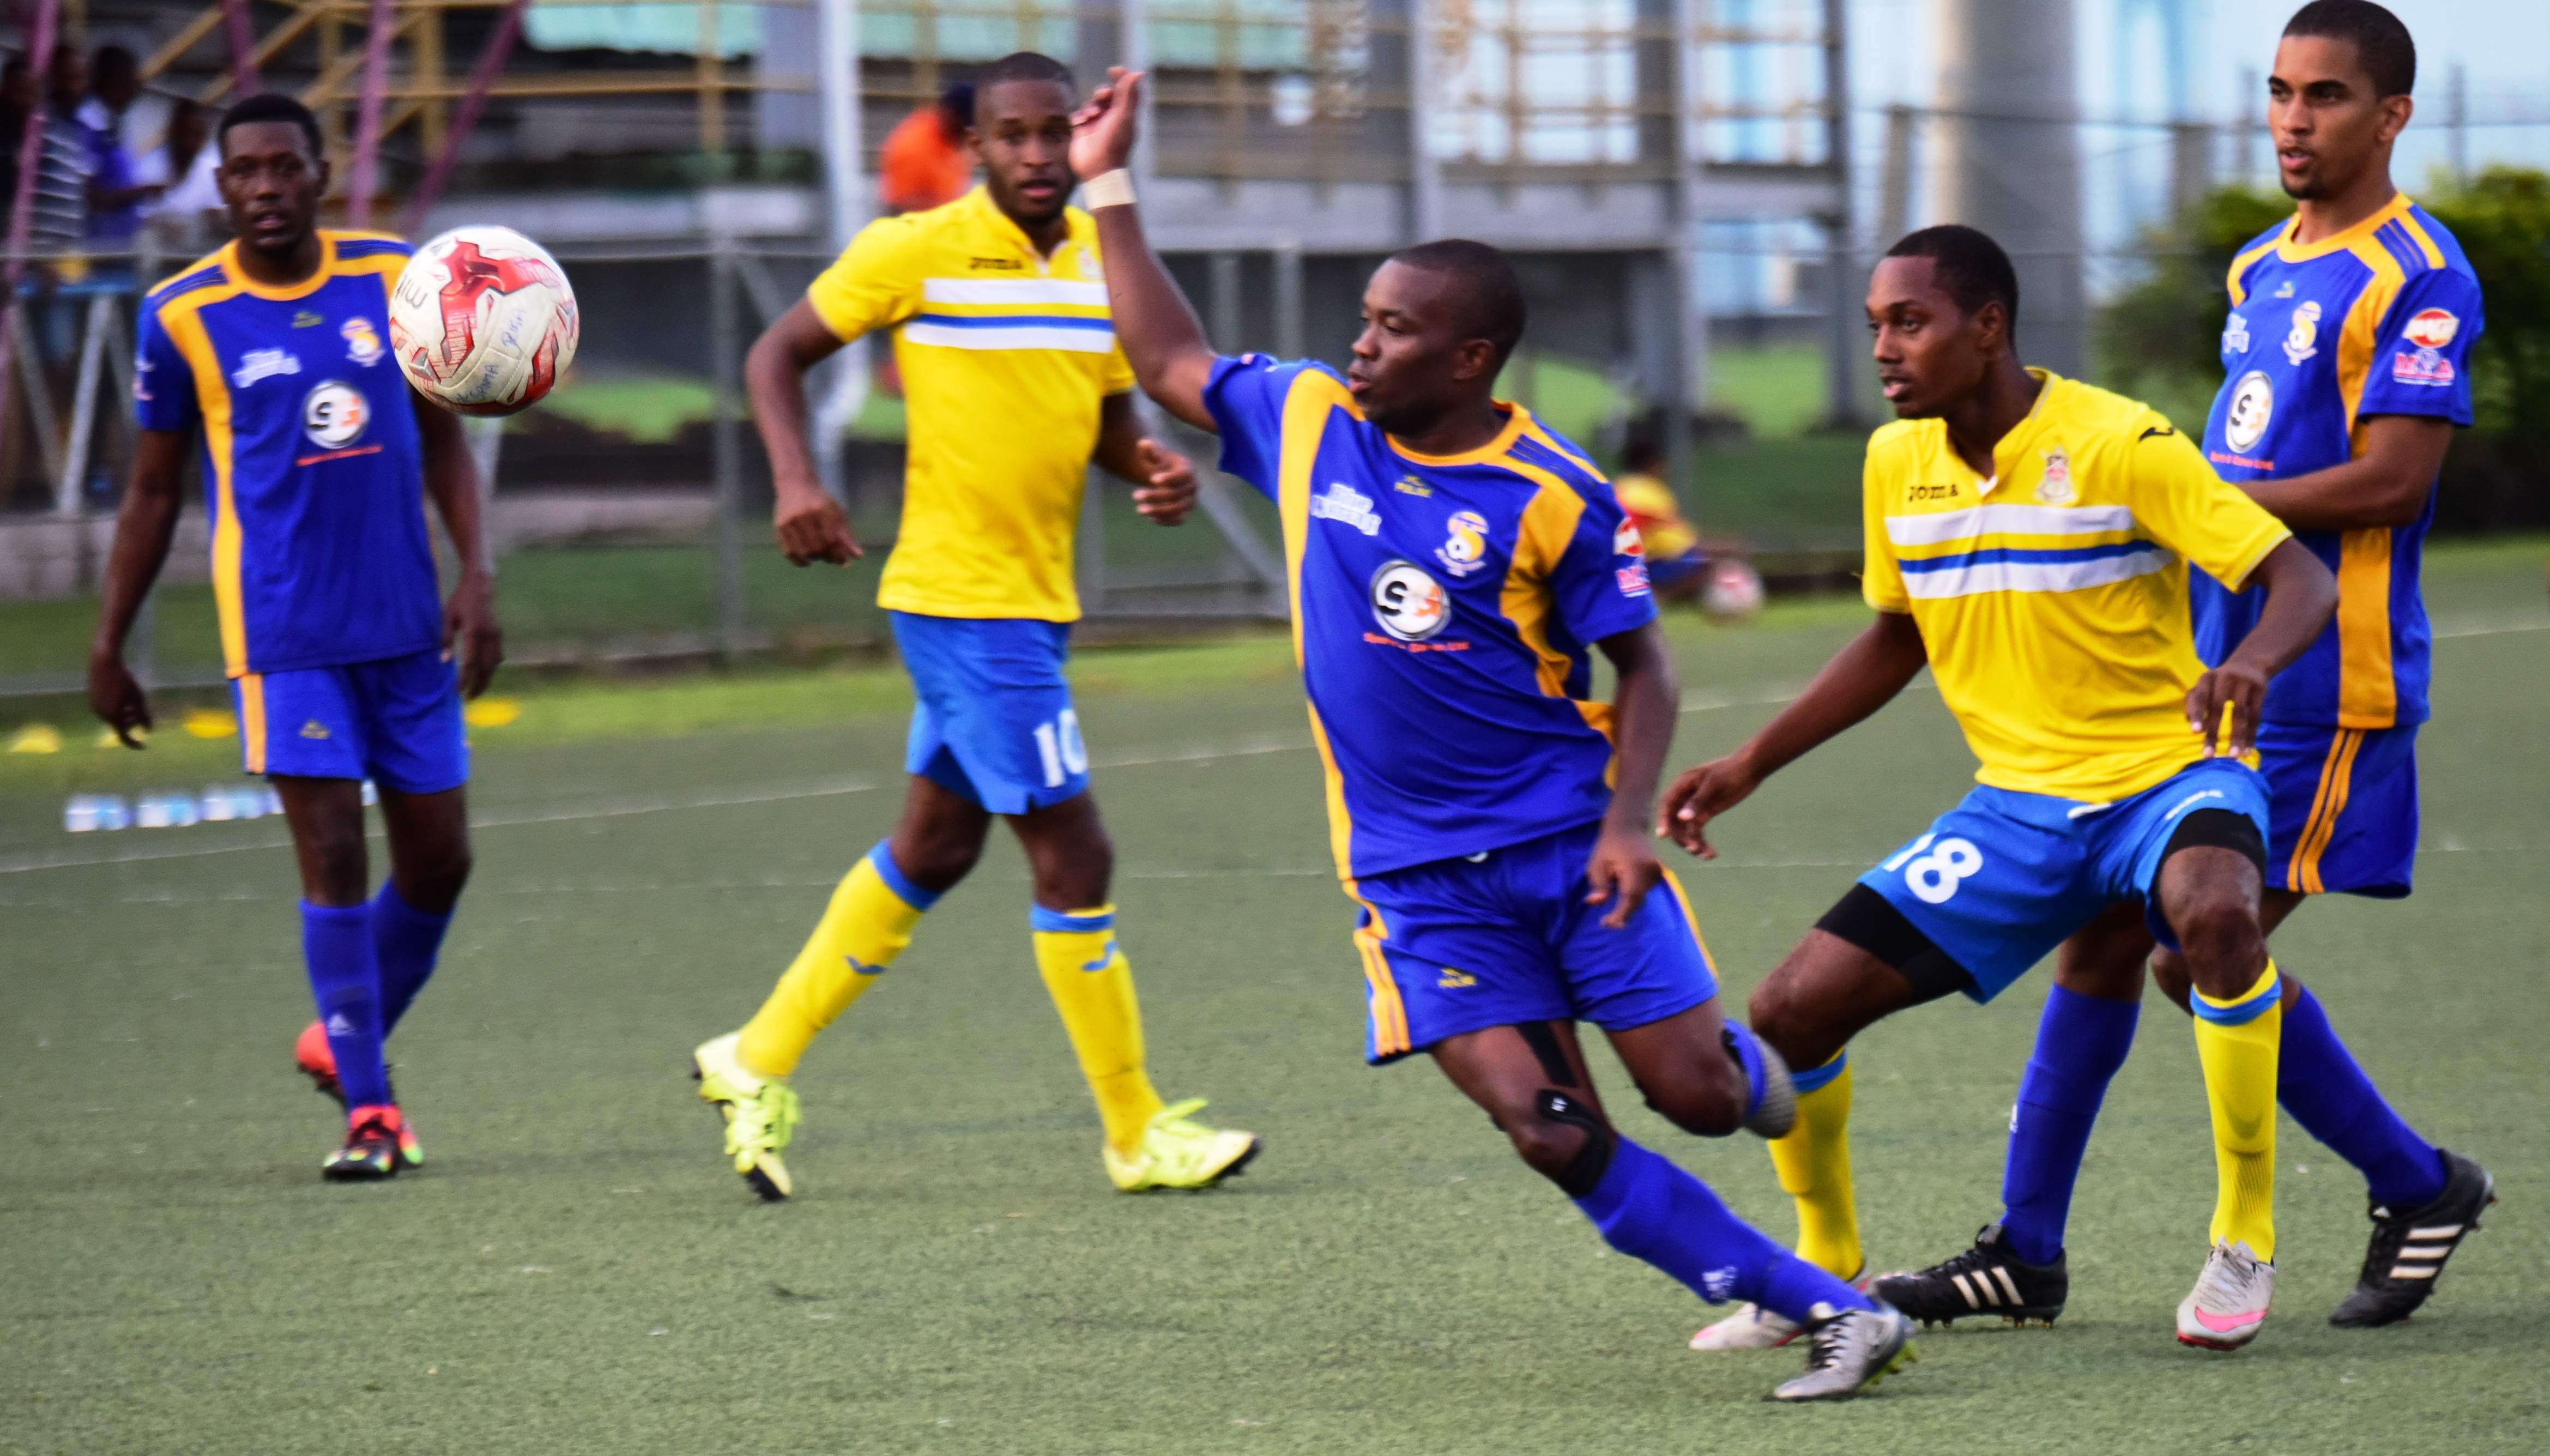 National Super League action between 2016 Champions FC Santa Rosa (purple) and Defence Force earlier this season. The teams filled the top two spot in the competition.